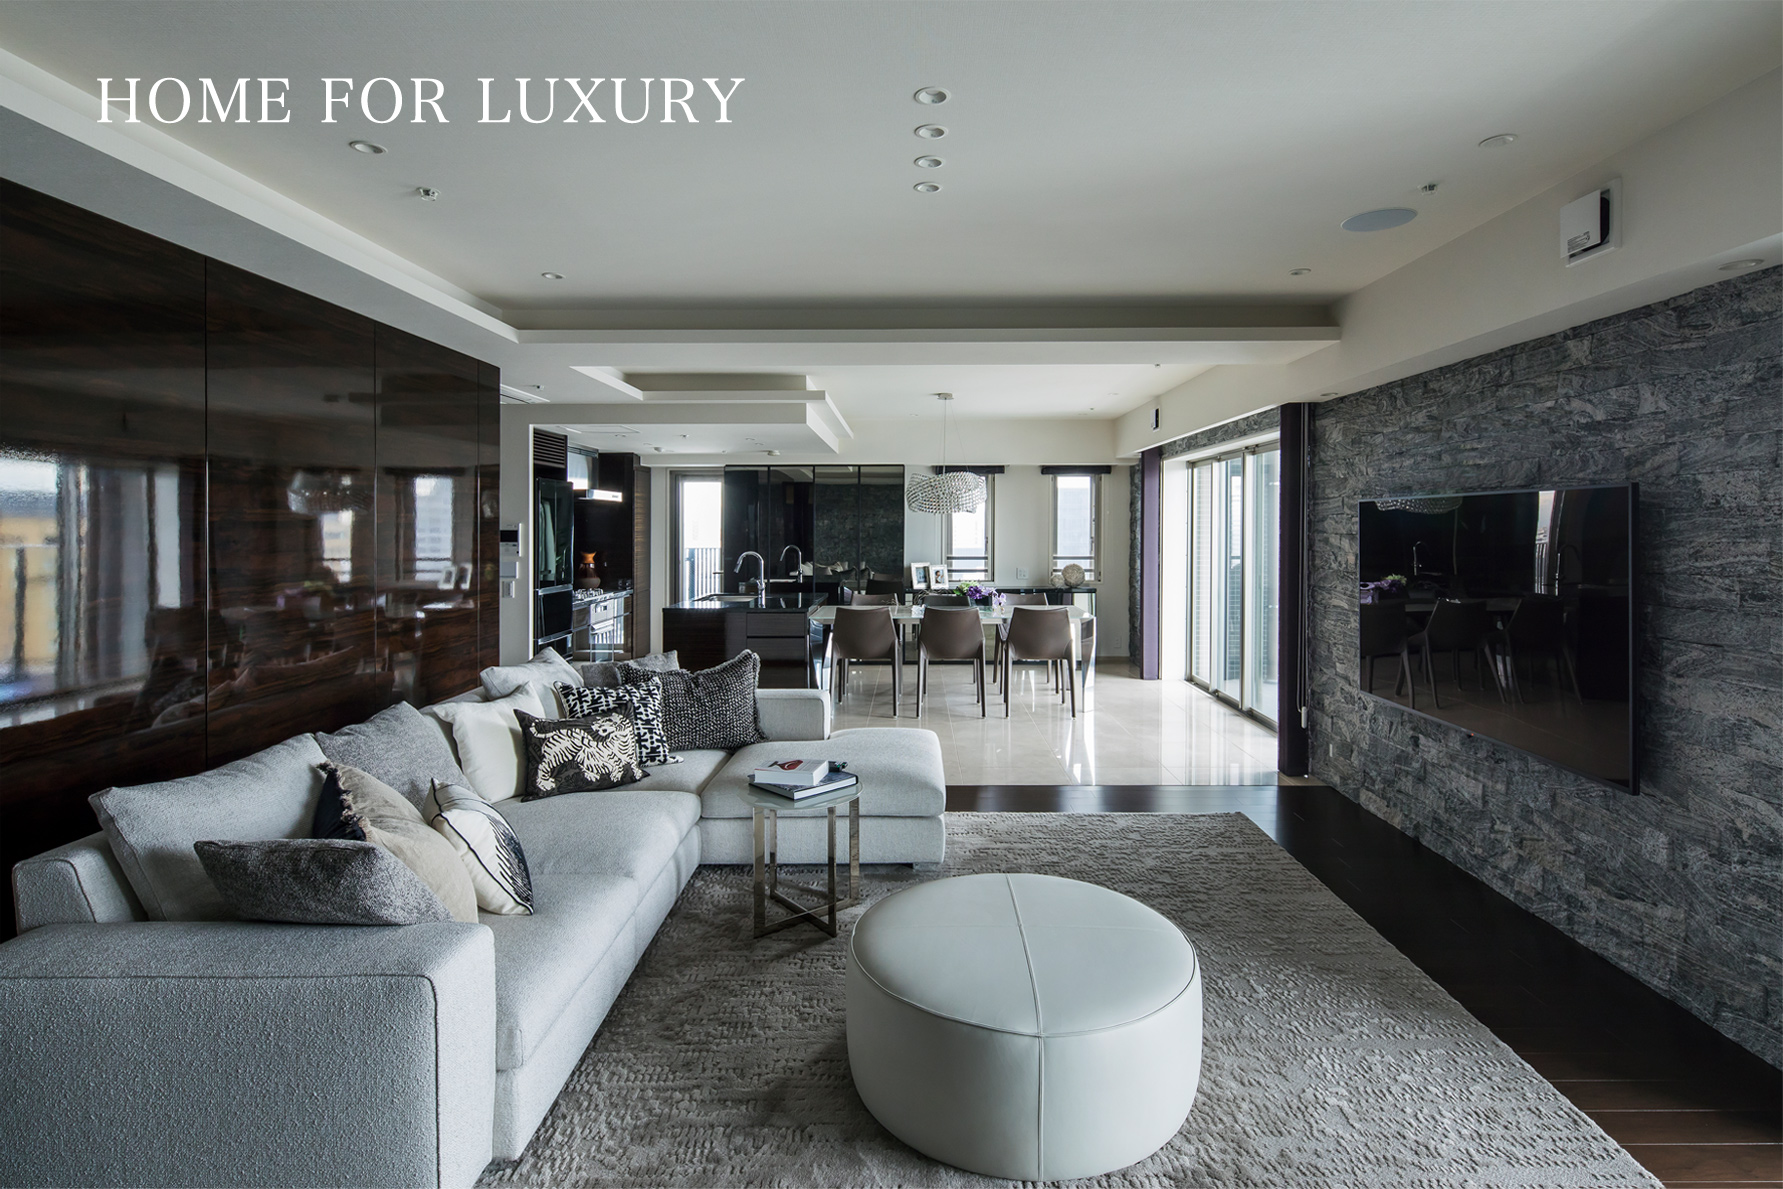 HOME FOR LUXURY